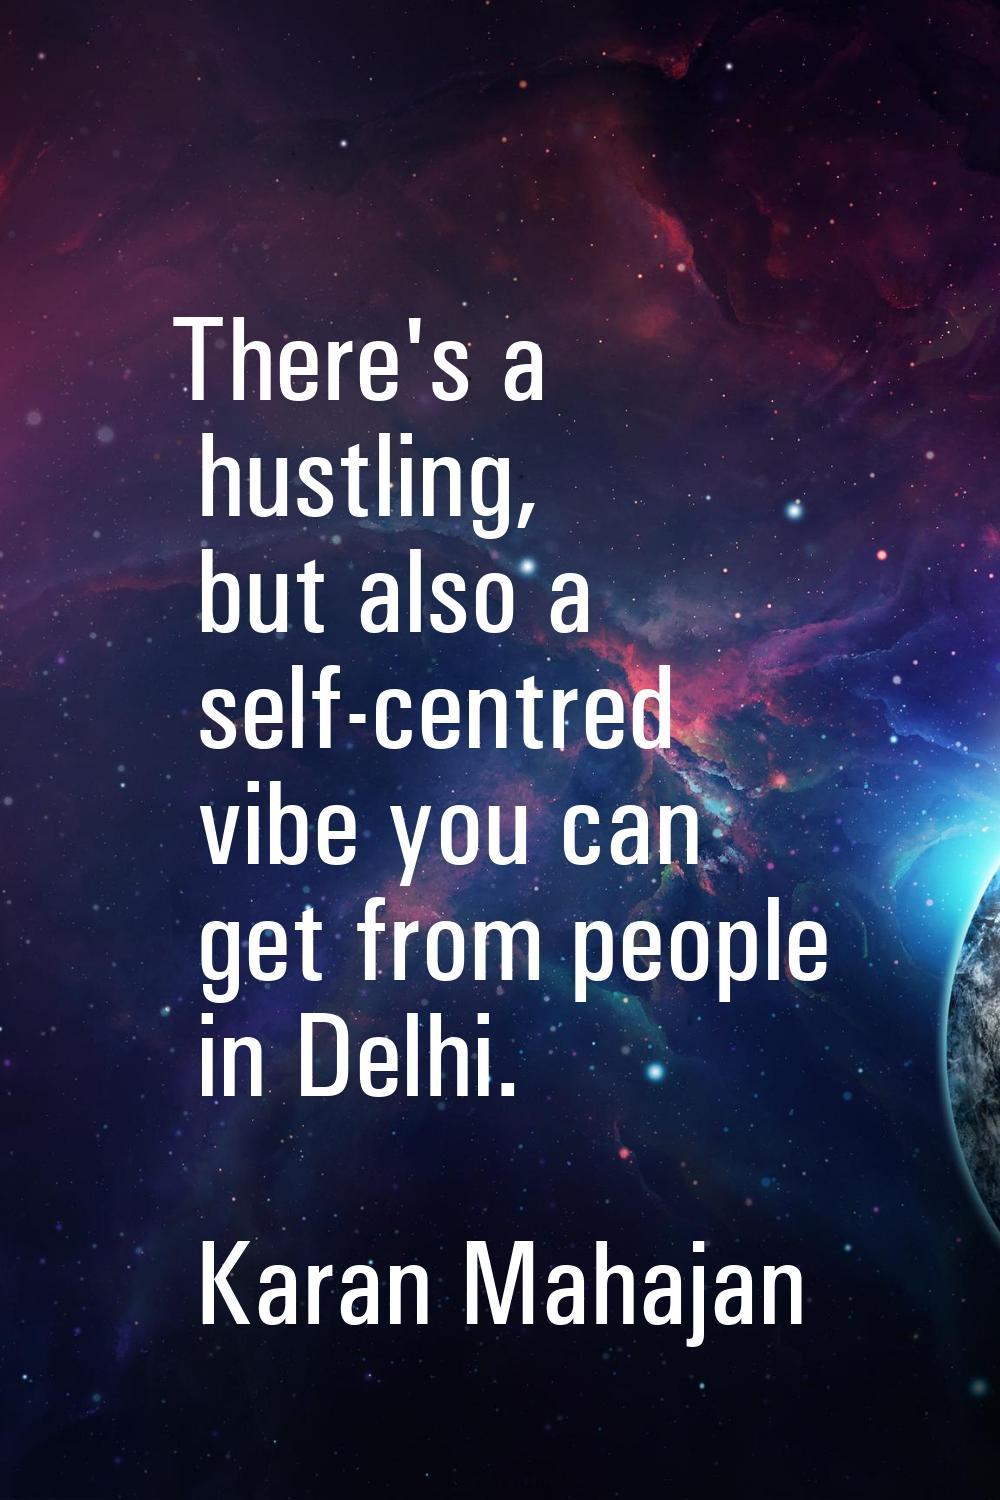 There's a hustling, but also a self-centred vibe you can get from people in Delhi.